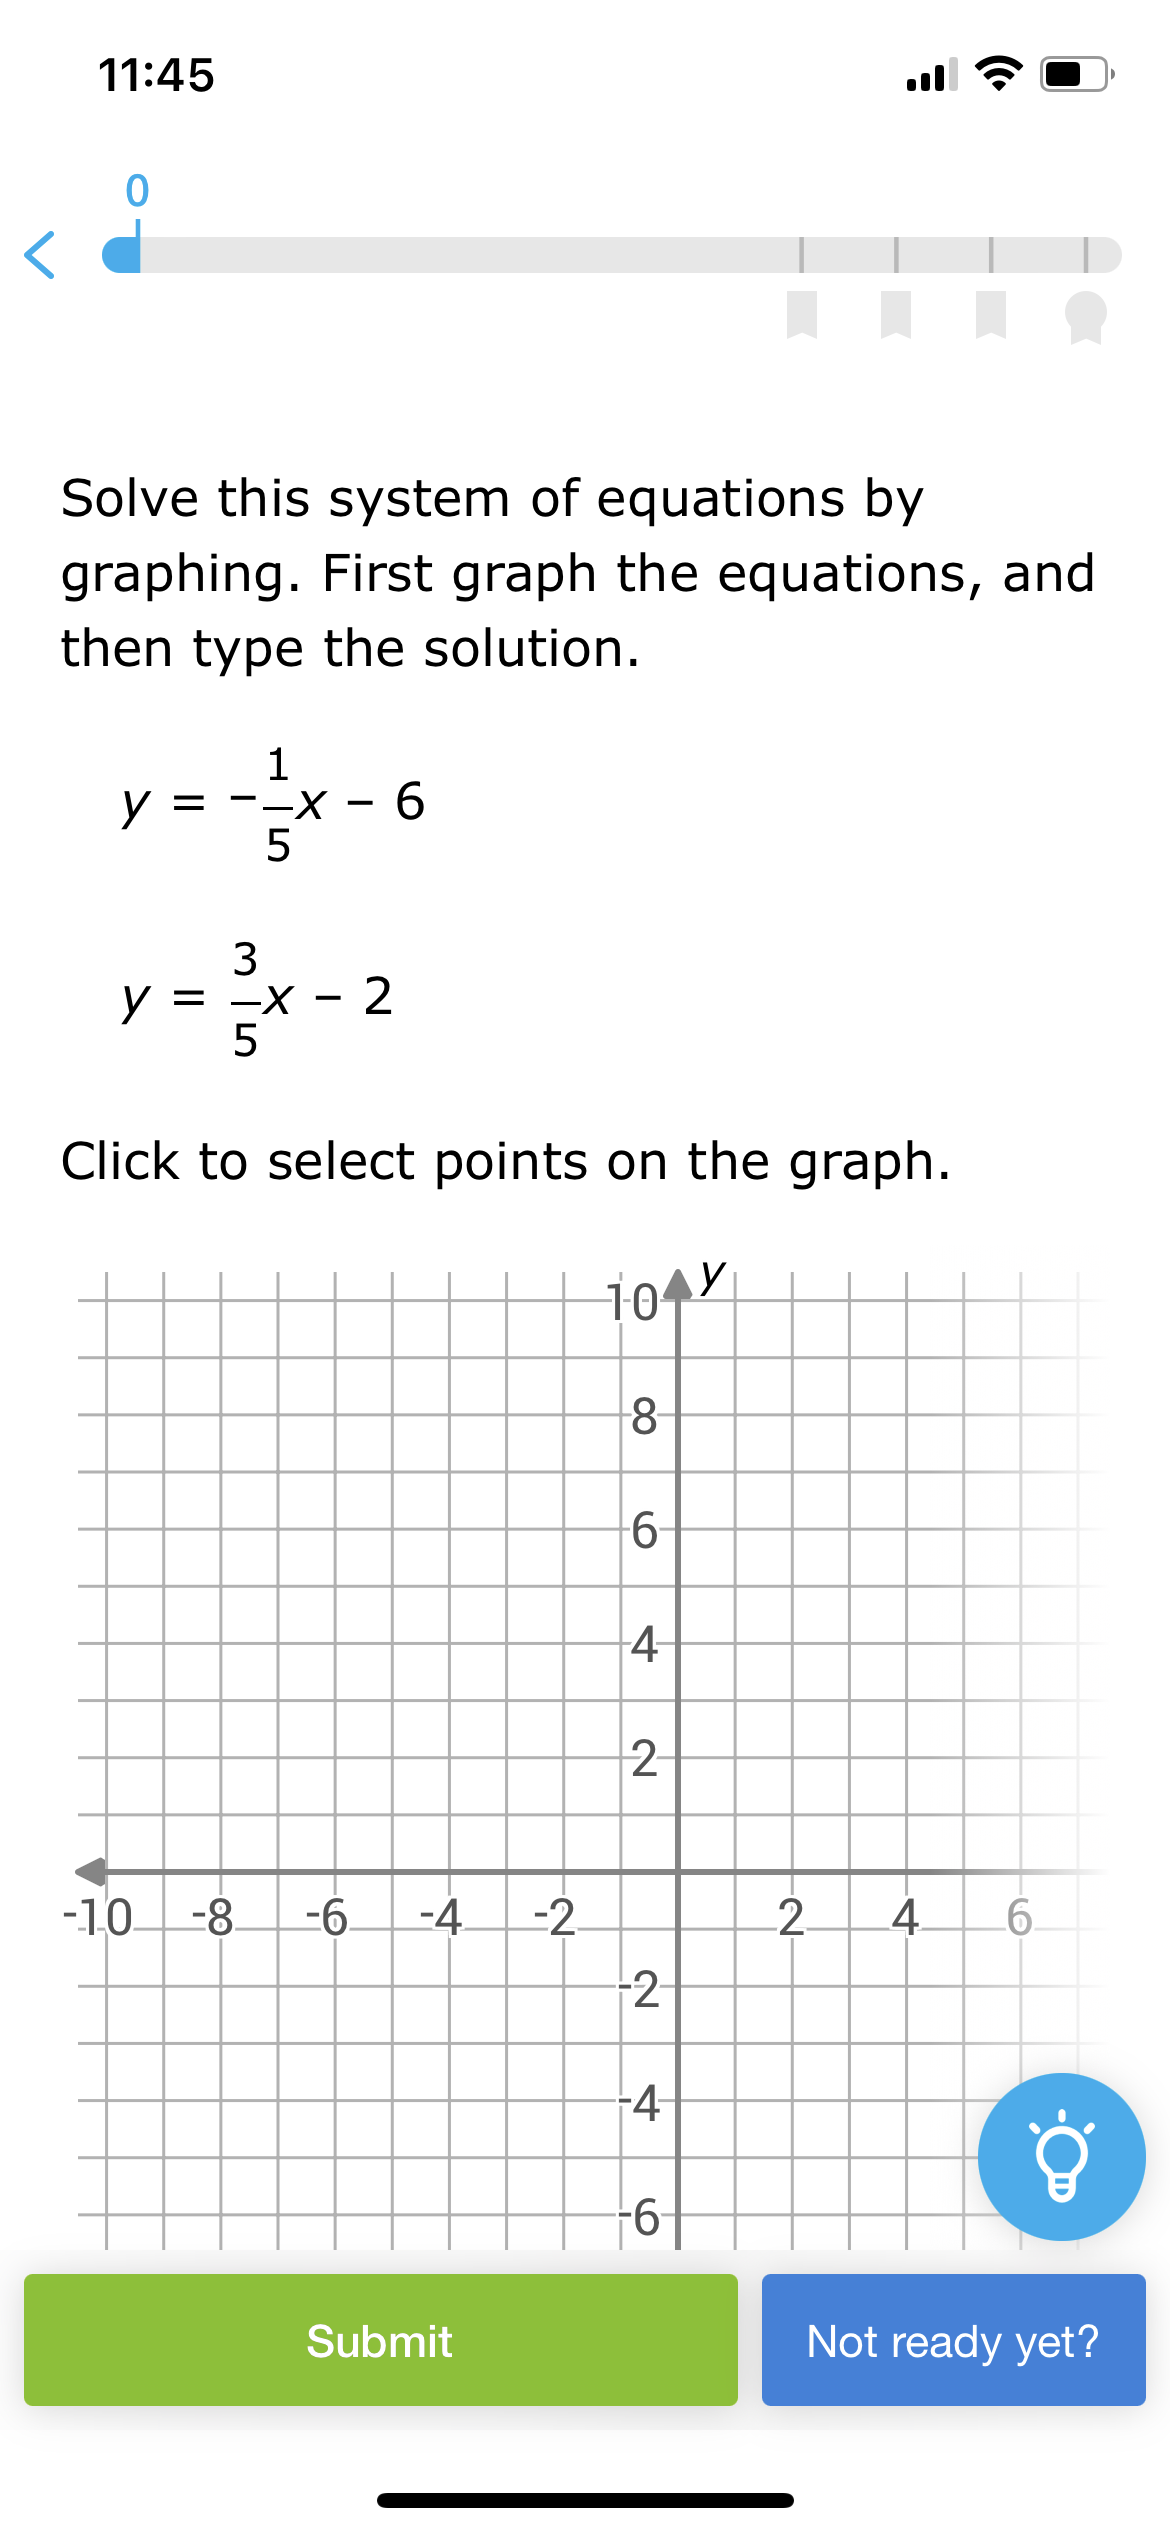 11:45
0
Solve this system of equations by
graphing. First graph the equations, and
then type the solution.
1
-
y = --x 6
5
35
y = -x - 2
Click to select points on the graph.
y
10
8-
60
4
2-
-10-8 -6
-4 -2
2.
4
6.
2-
-4-
Submit
-6
Not ready yet?